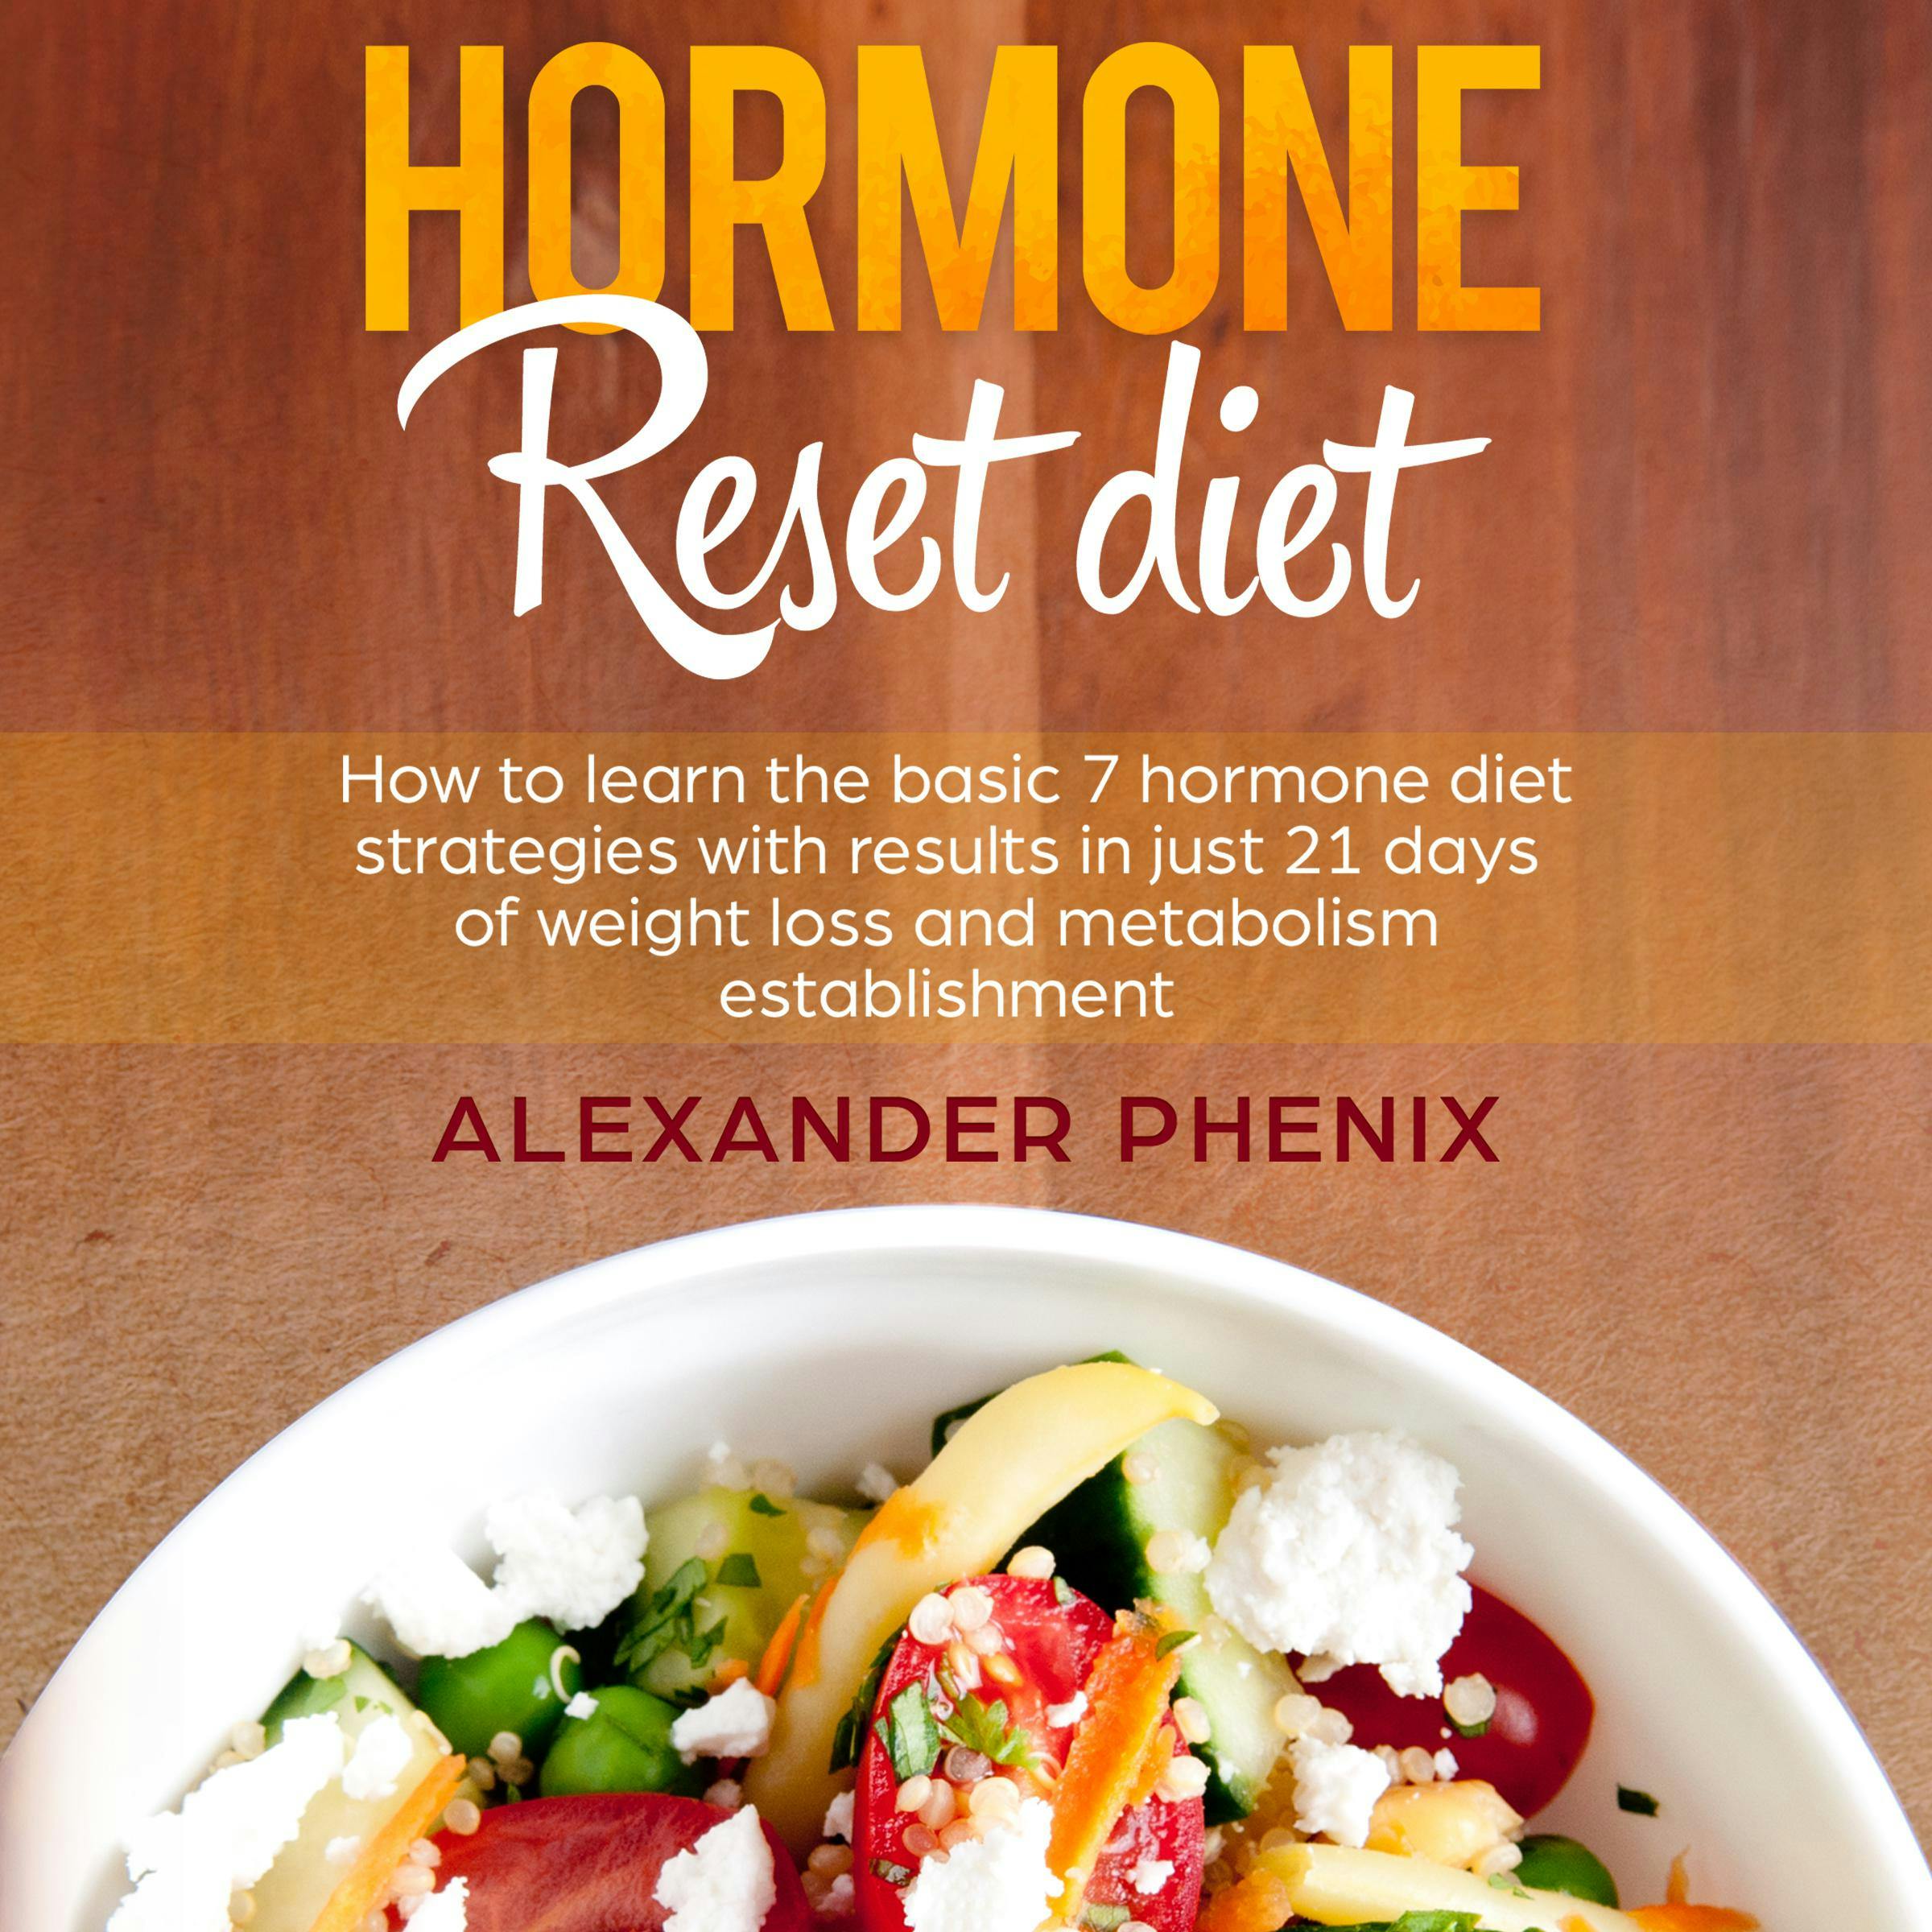 Hormone Reset Diet: How to Learn the Basic 7 Hormone Diet Strategies with Results in Just 21 Days of Weight Loss and Metabolism Establishment - Alexander Phenix